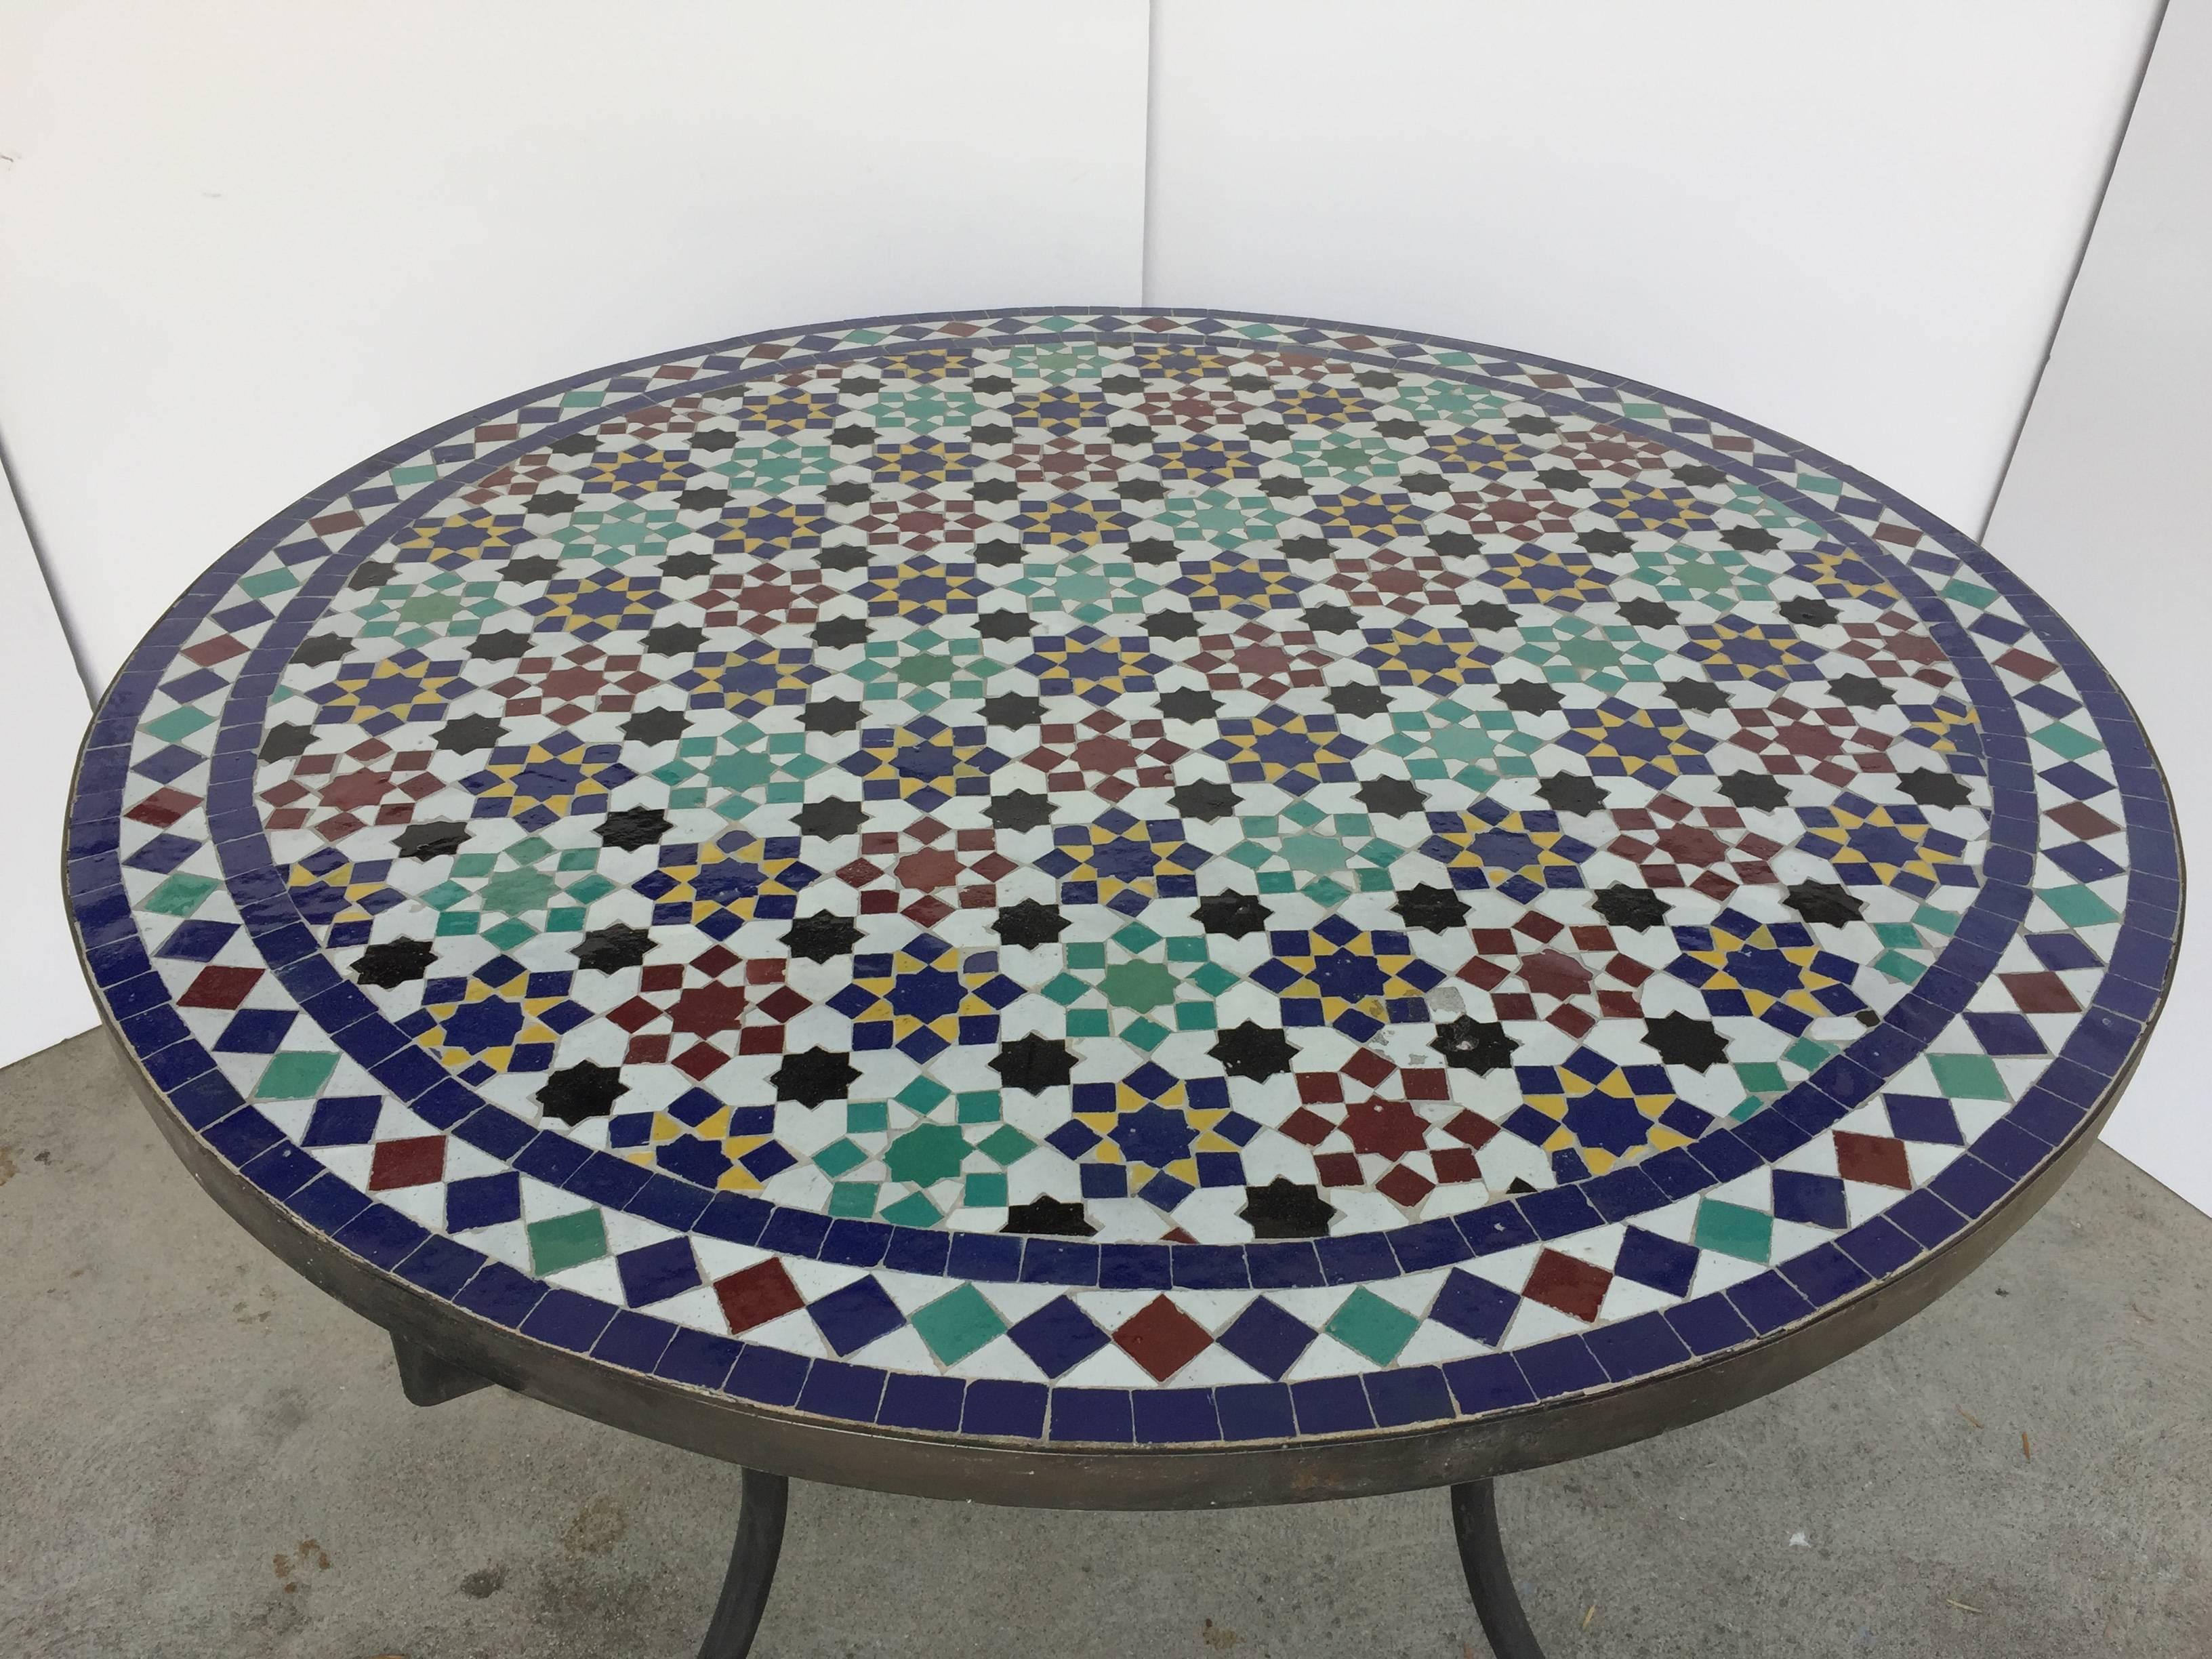 Hand-Crafted Moroccan Round Mosaic Tile Outdoor Table in Moorish Fez Design